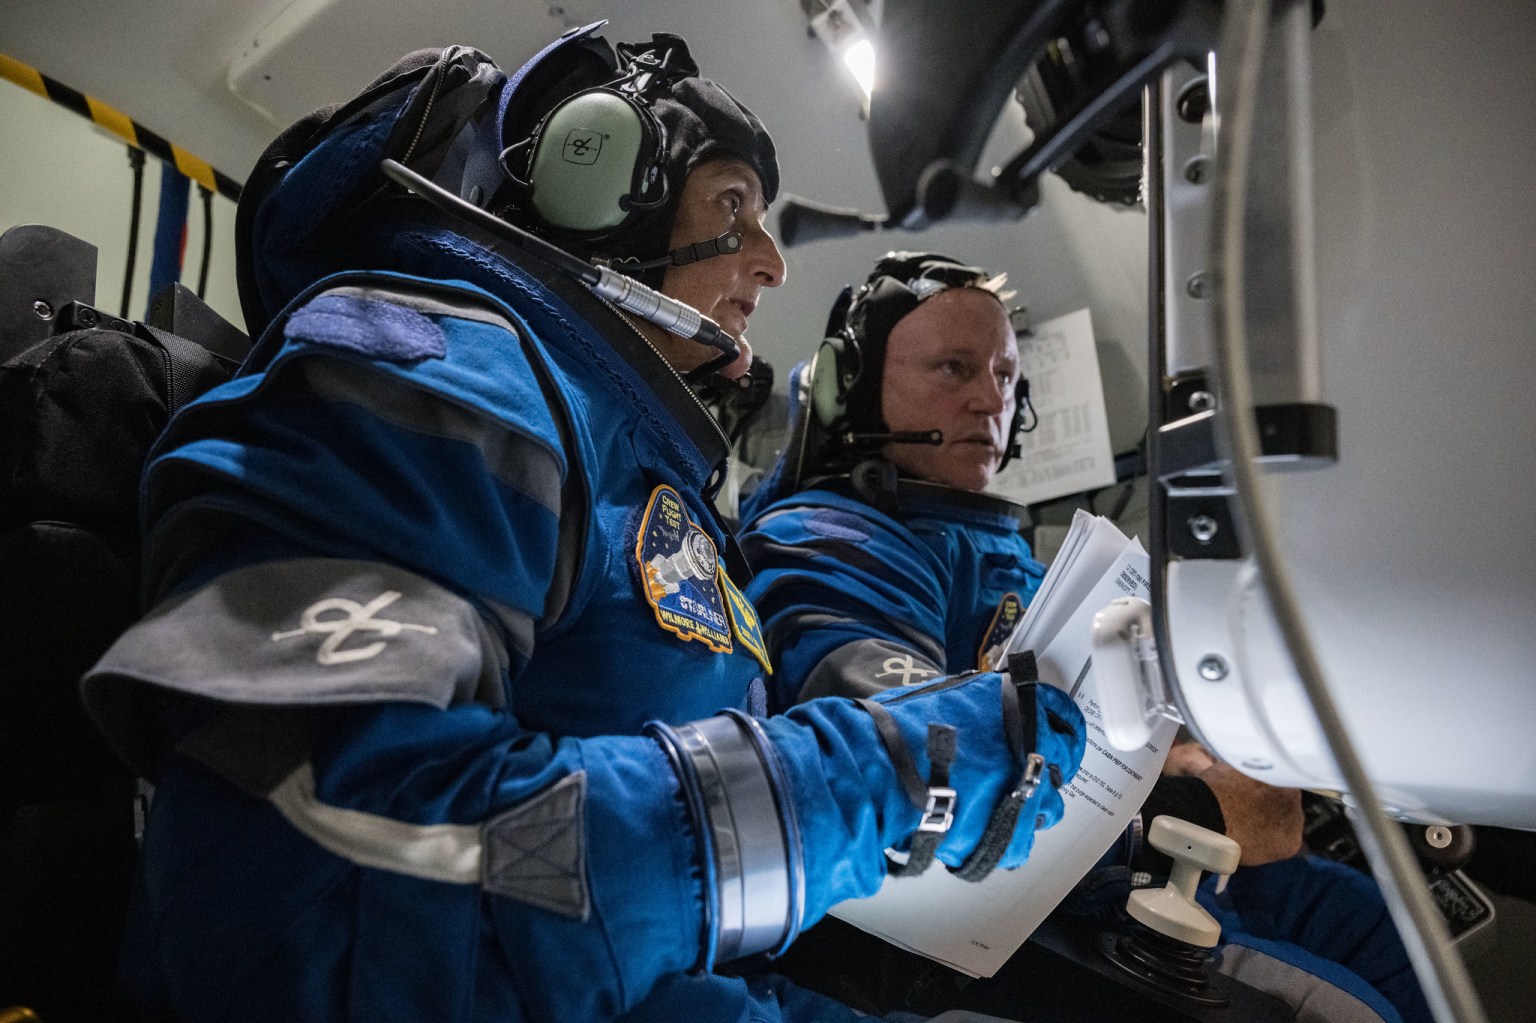 NASA’s Boeing Crew Flight Test astronauts Butch Wilmore and Suni Williams prepare for their mission in the company’s Starliner spacecraft simulator at the agency’s Johnson Space Center in Houston.